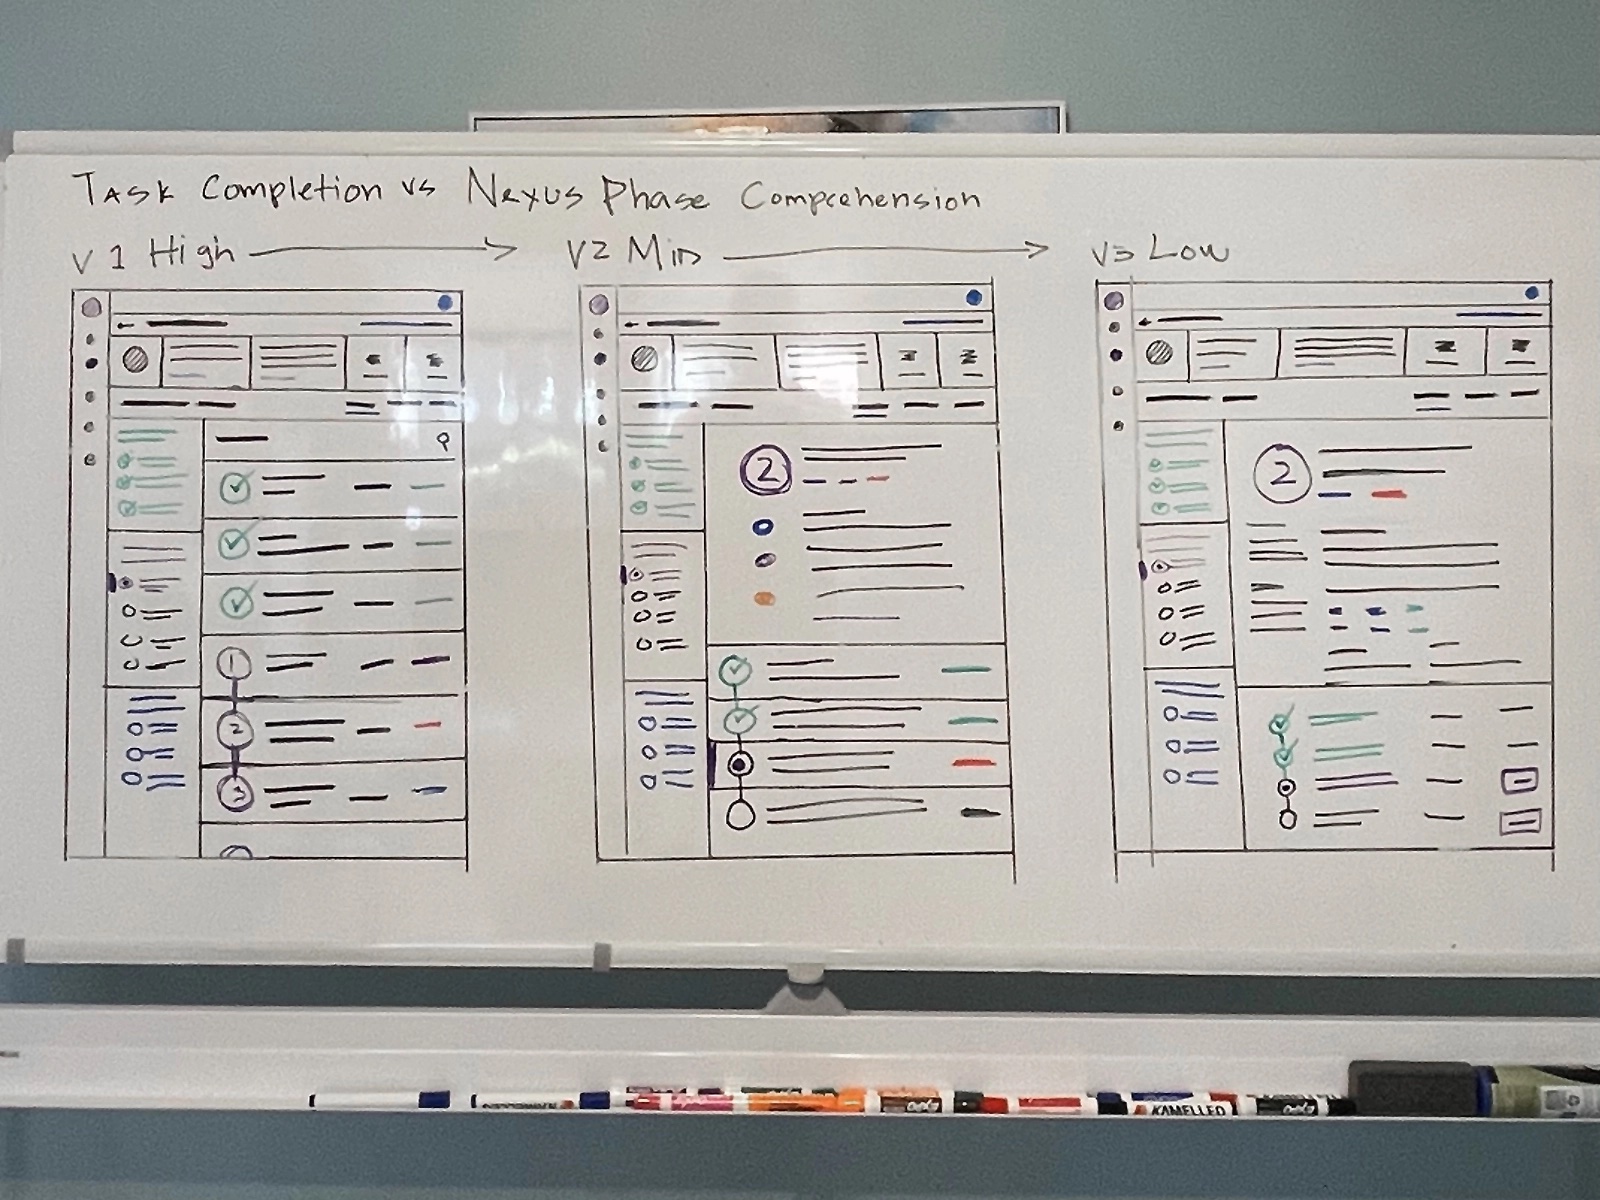 Wireframe visualized on the whiteboard.